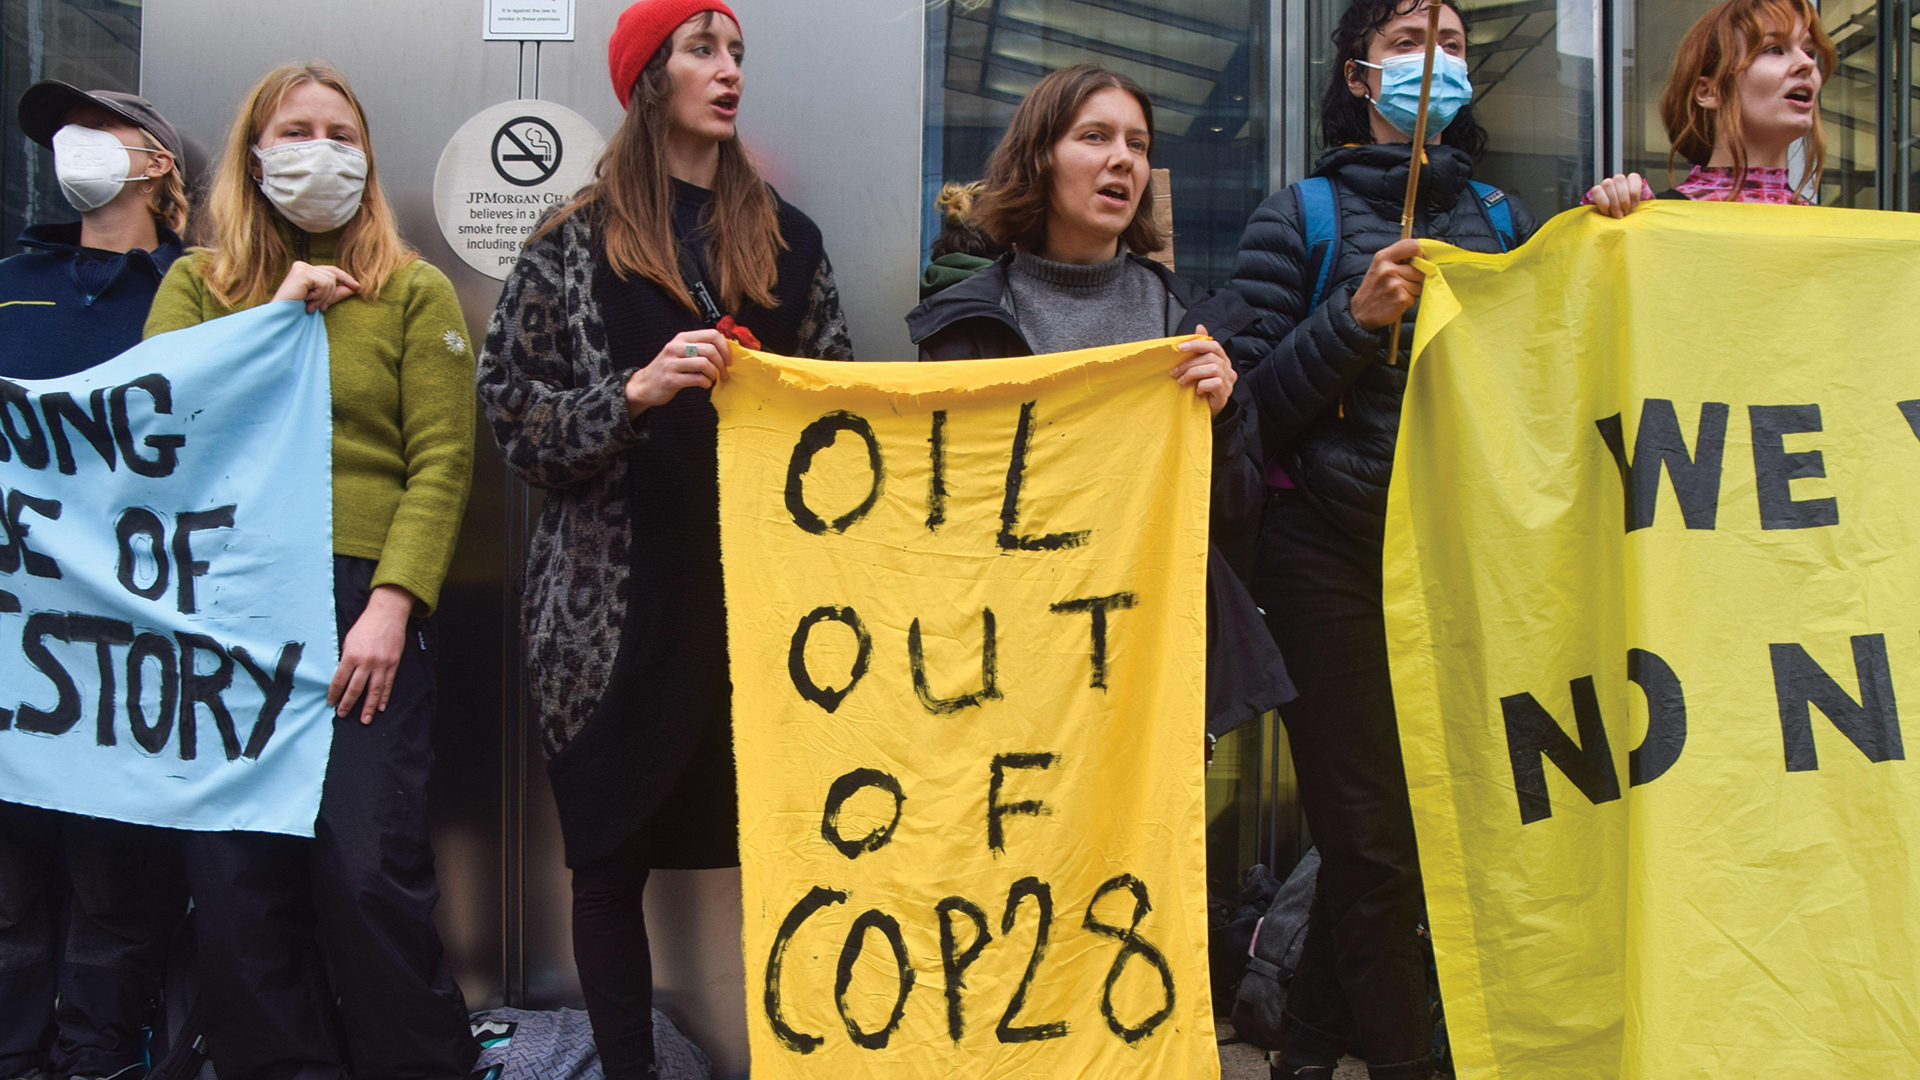 Protesters carrying banners against fossil fuels